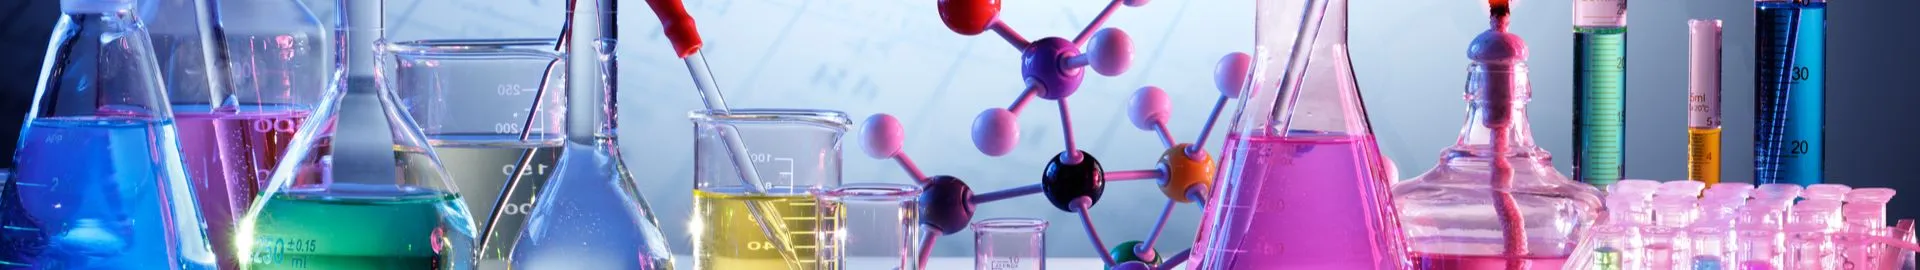 Engineering Plastic Compounds Market